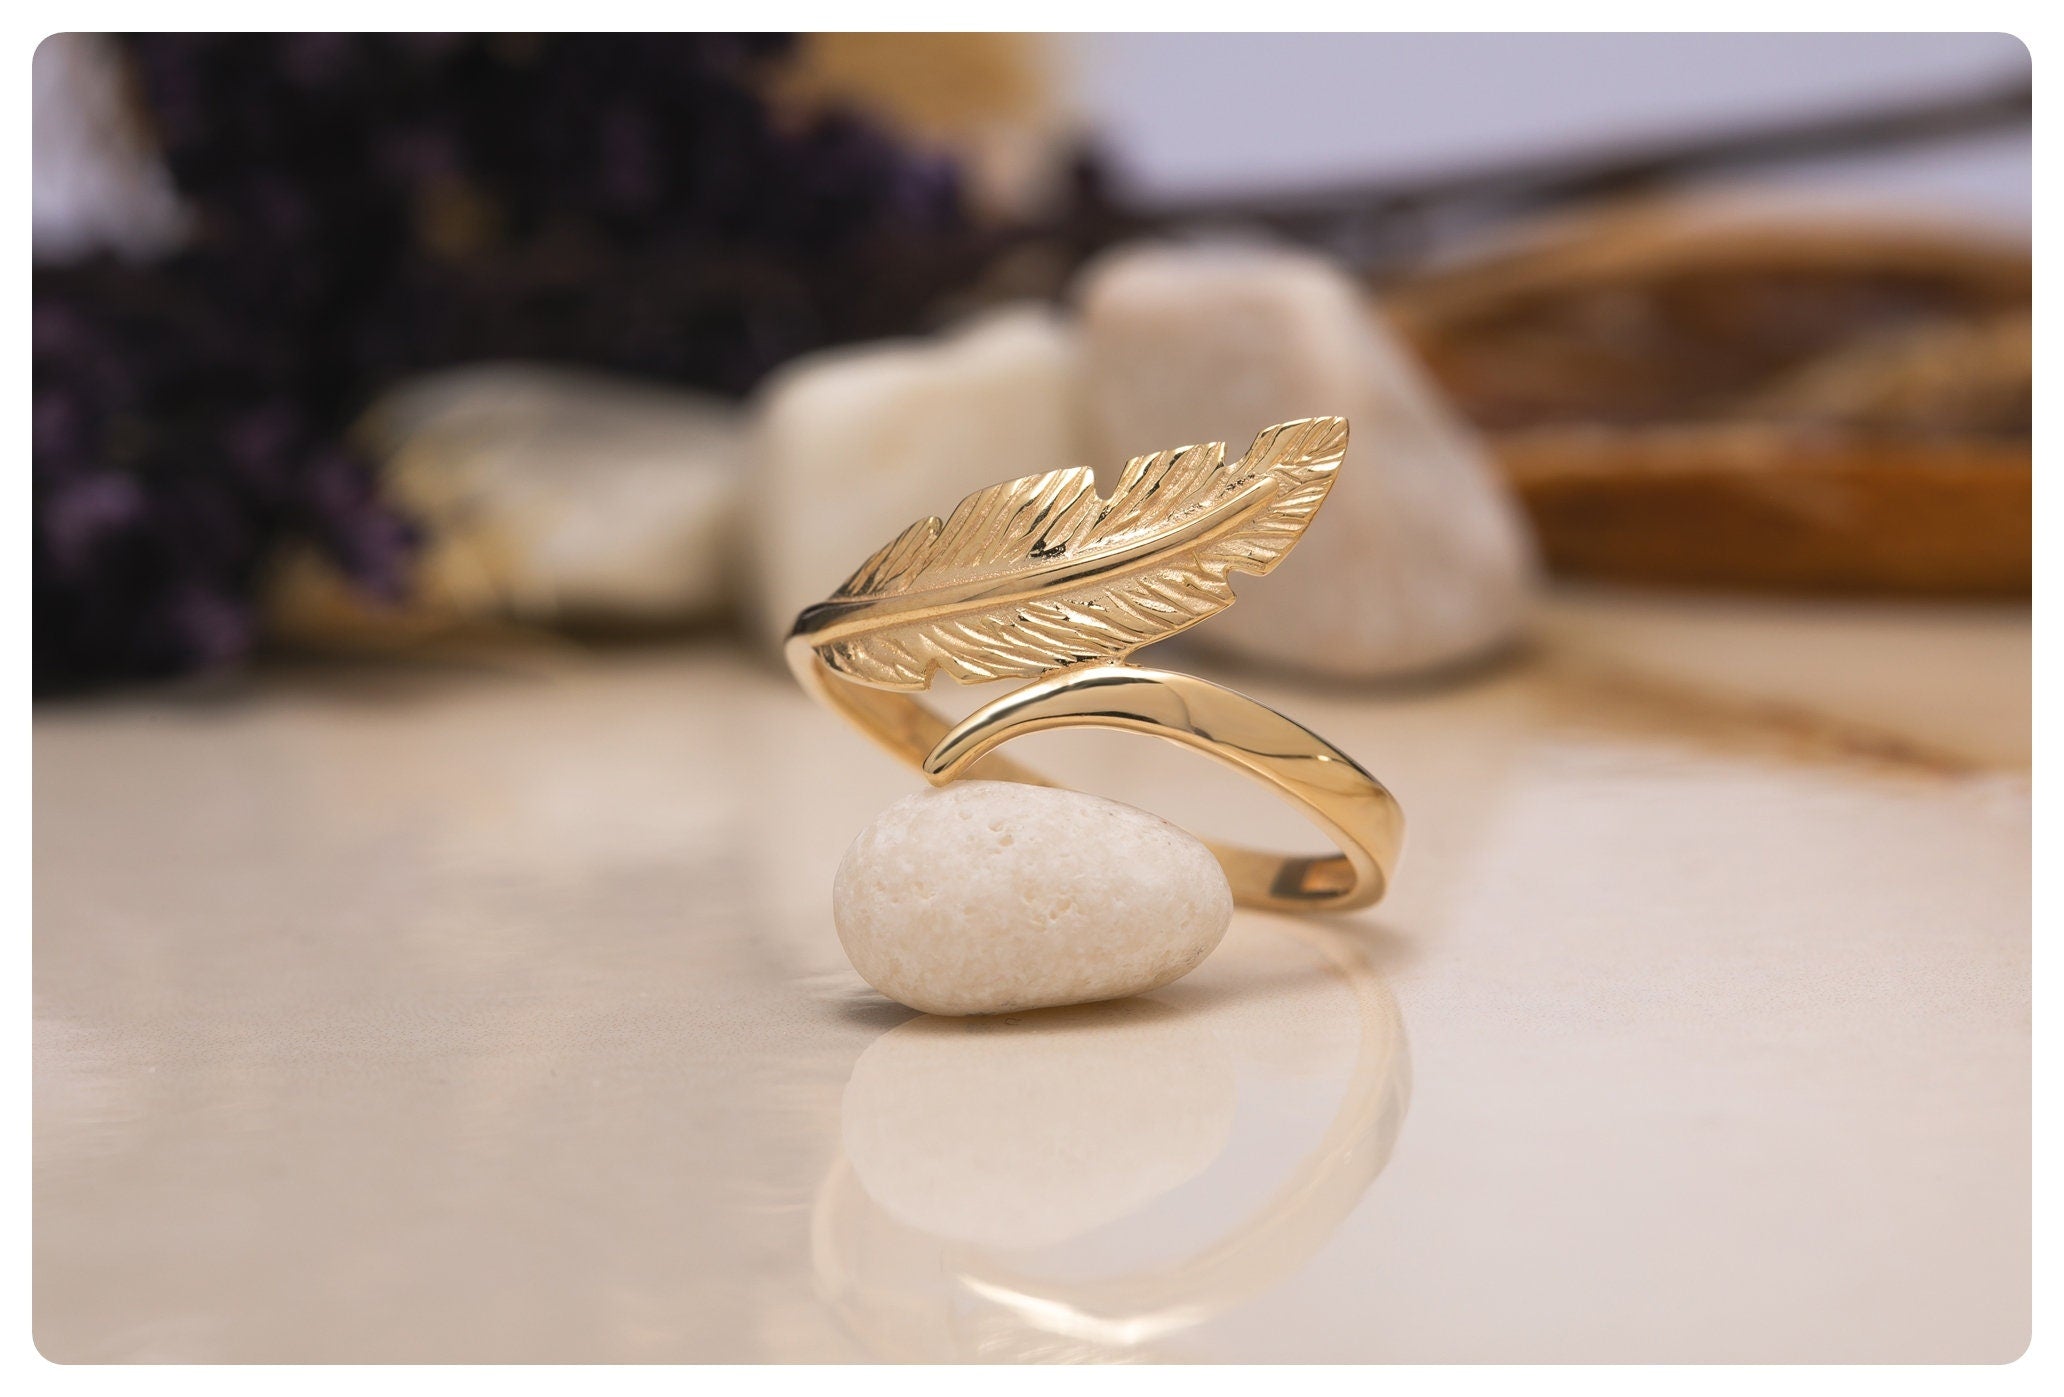 14K Solid Gold Leaf Ring - 925 Sterling Silver Leaf Ring - Minimalist Leaf Ring -Gift For Mother Day- Mother Day Jewelry - Gift for Her